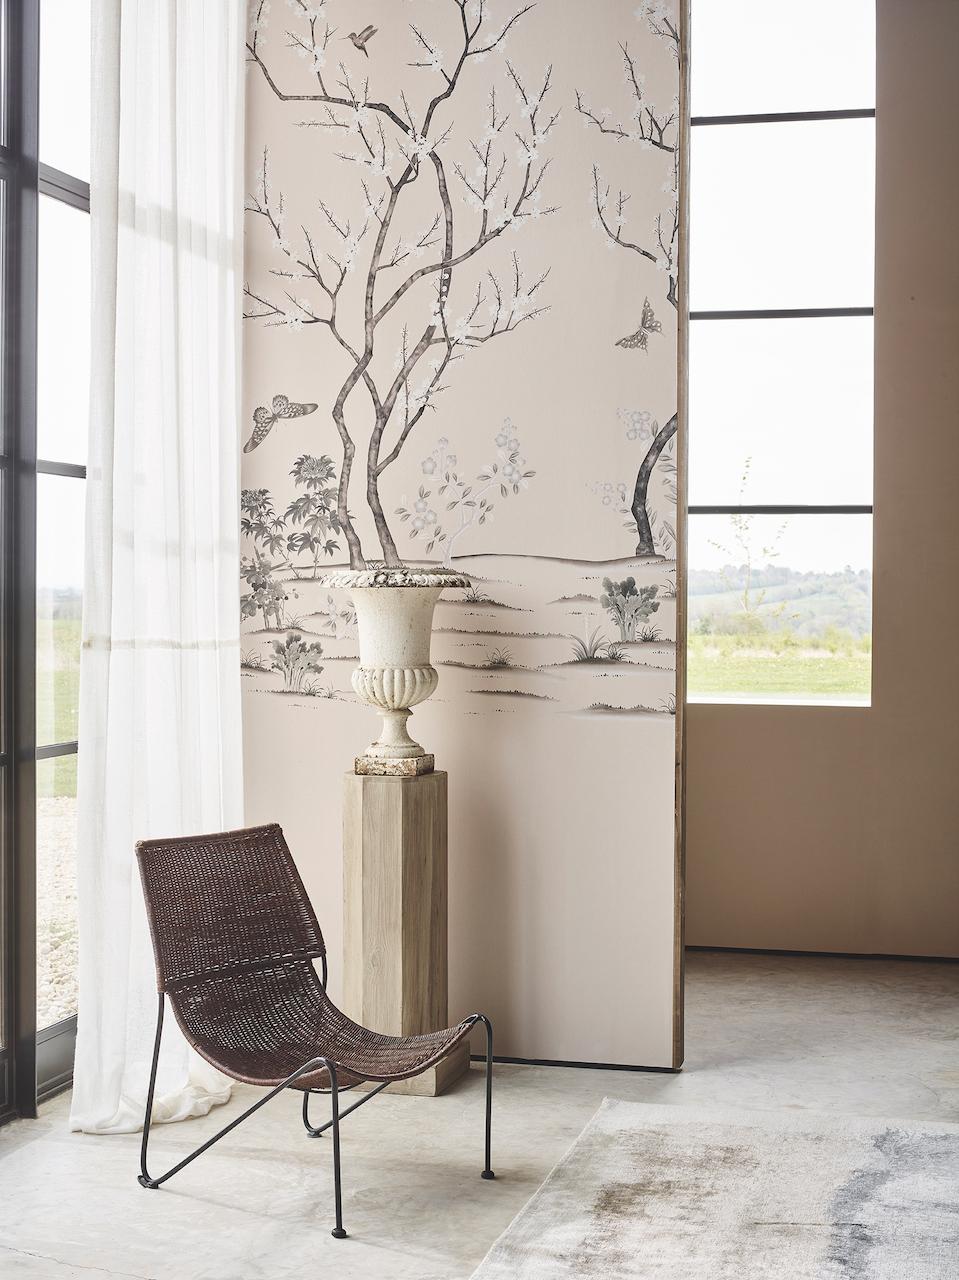 Gwyneth Paltrow x Fromental Wallcovering Collection is Inspired by Nature